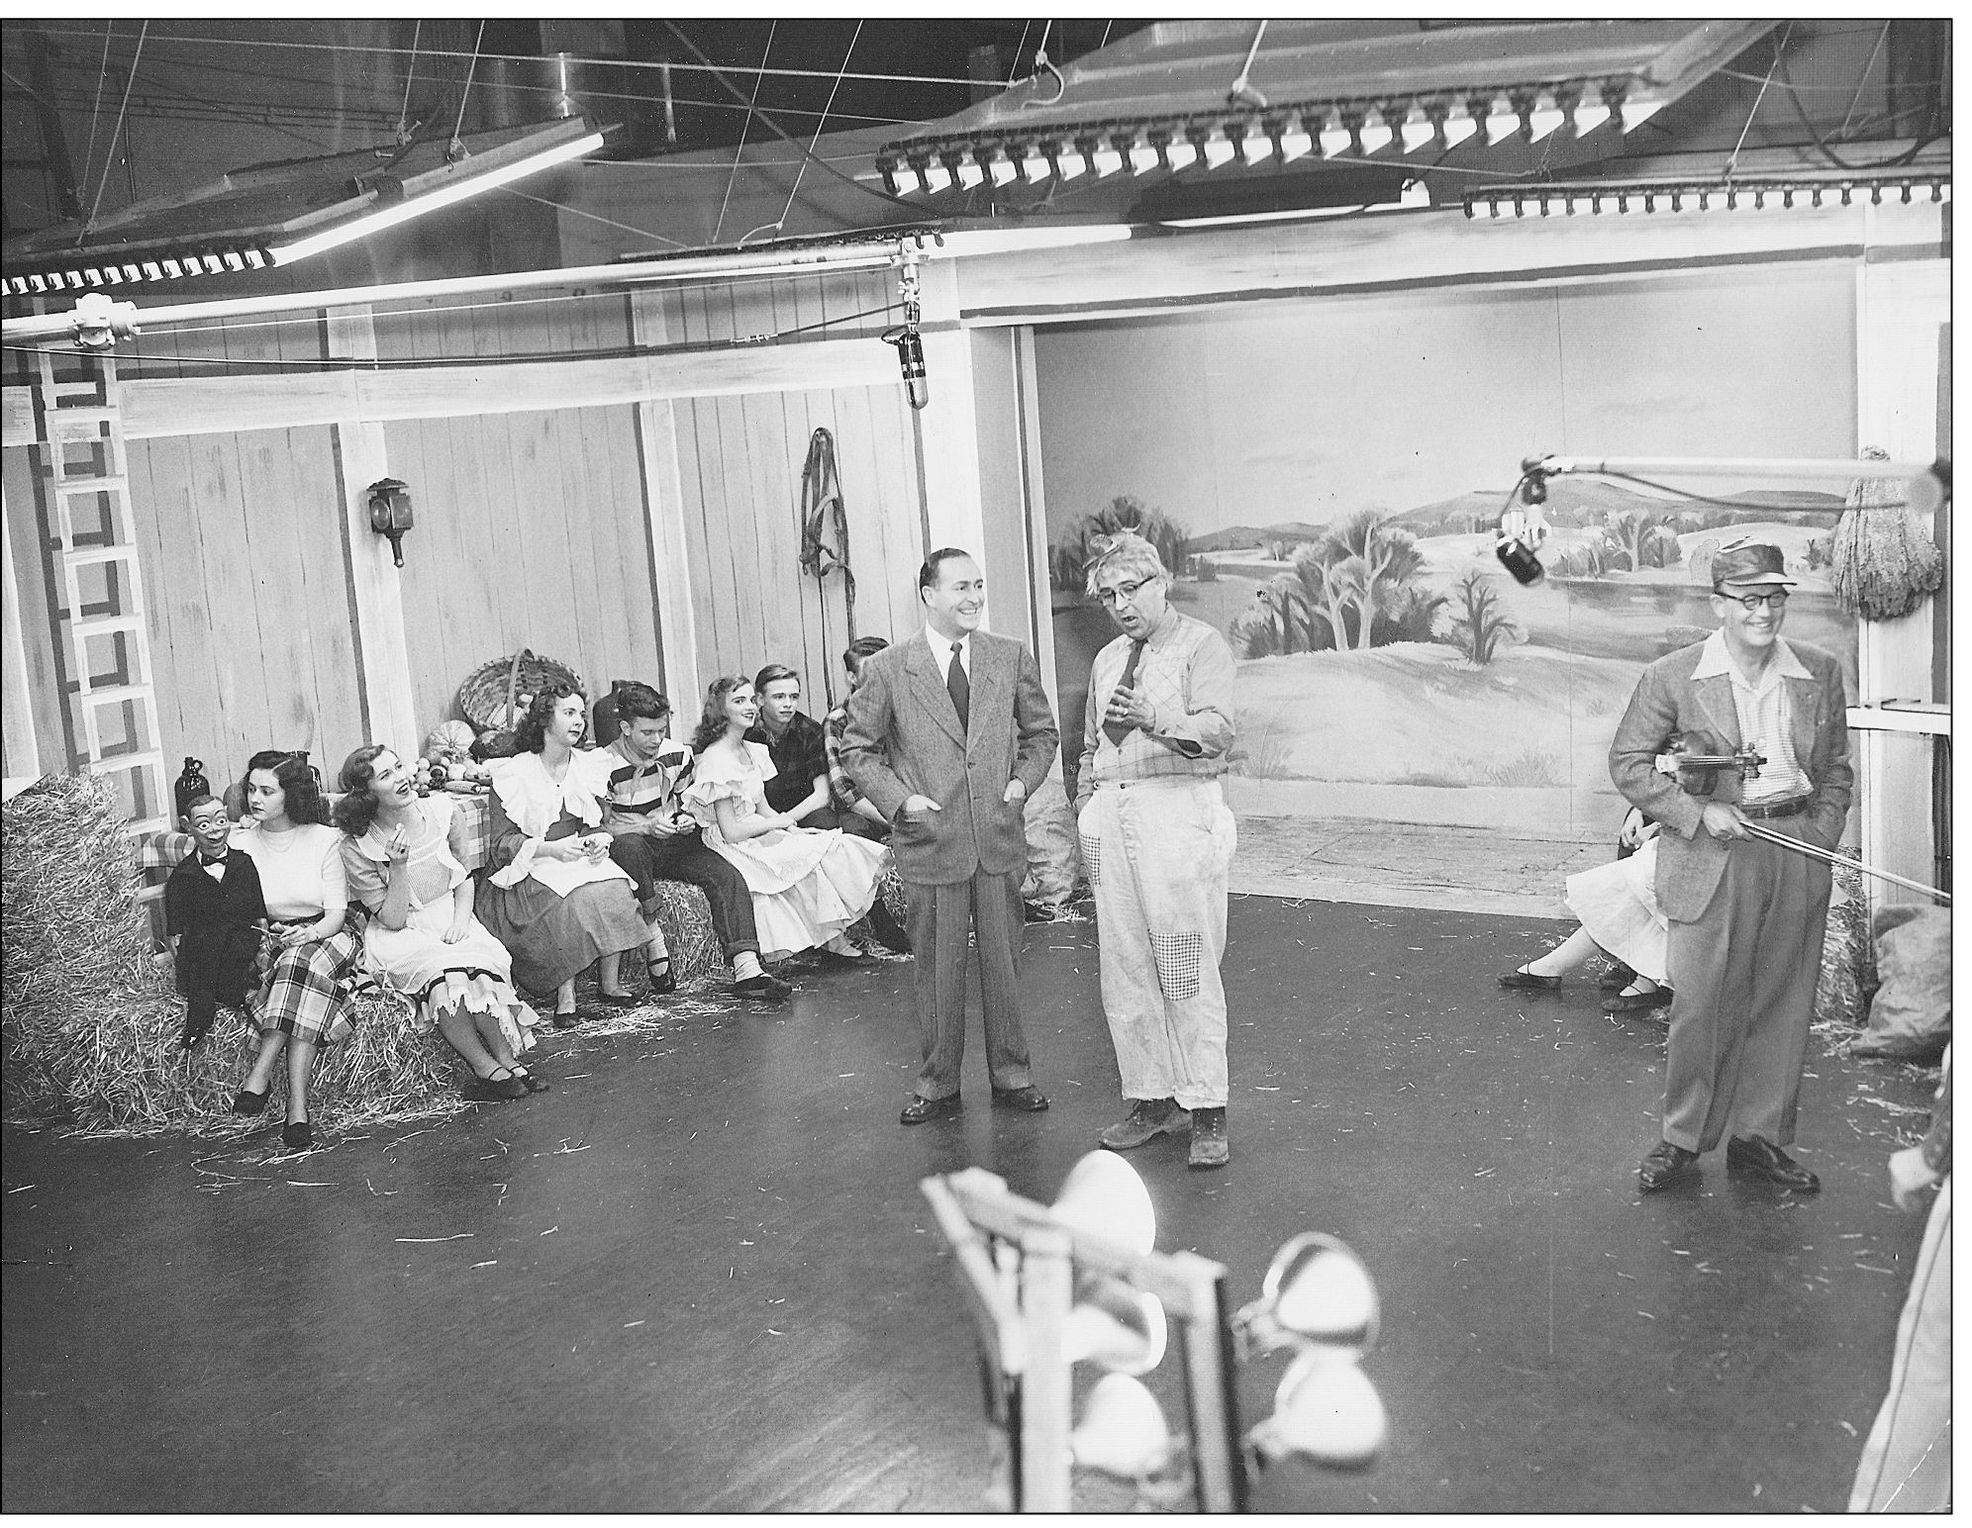 During the inaugural broadcast on WAVE-TV in 1948 director and emcee Burt - photo 3